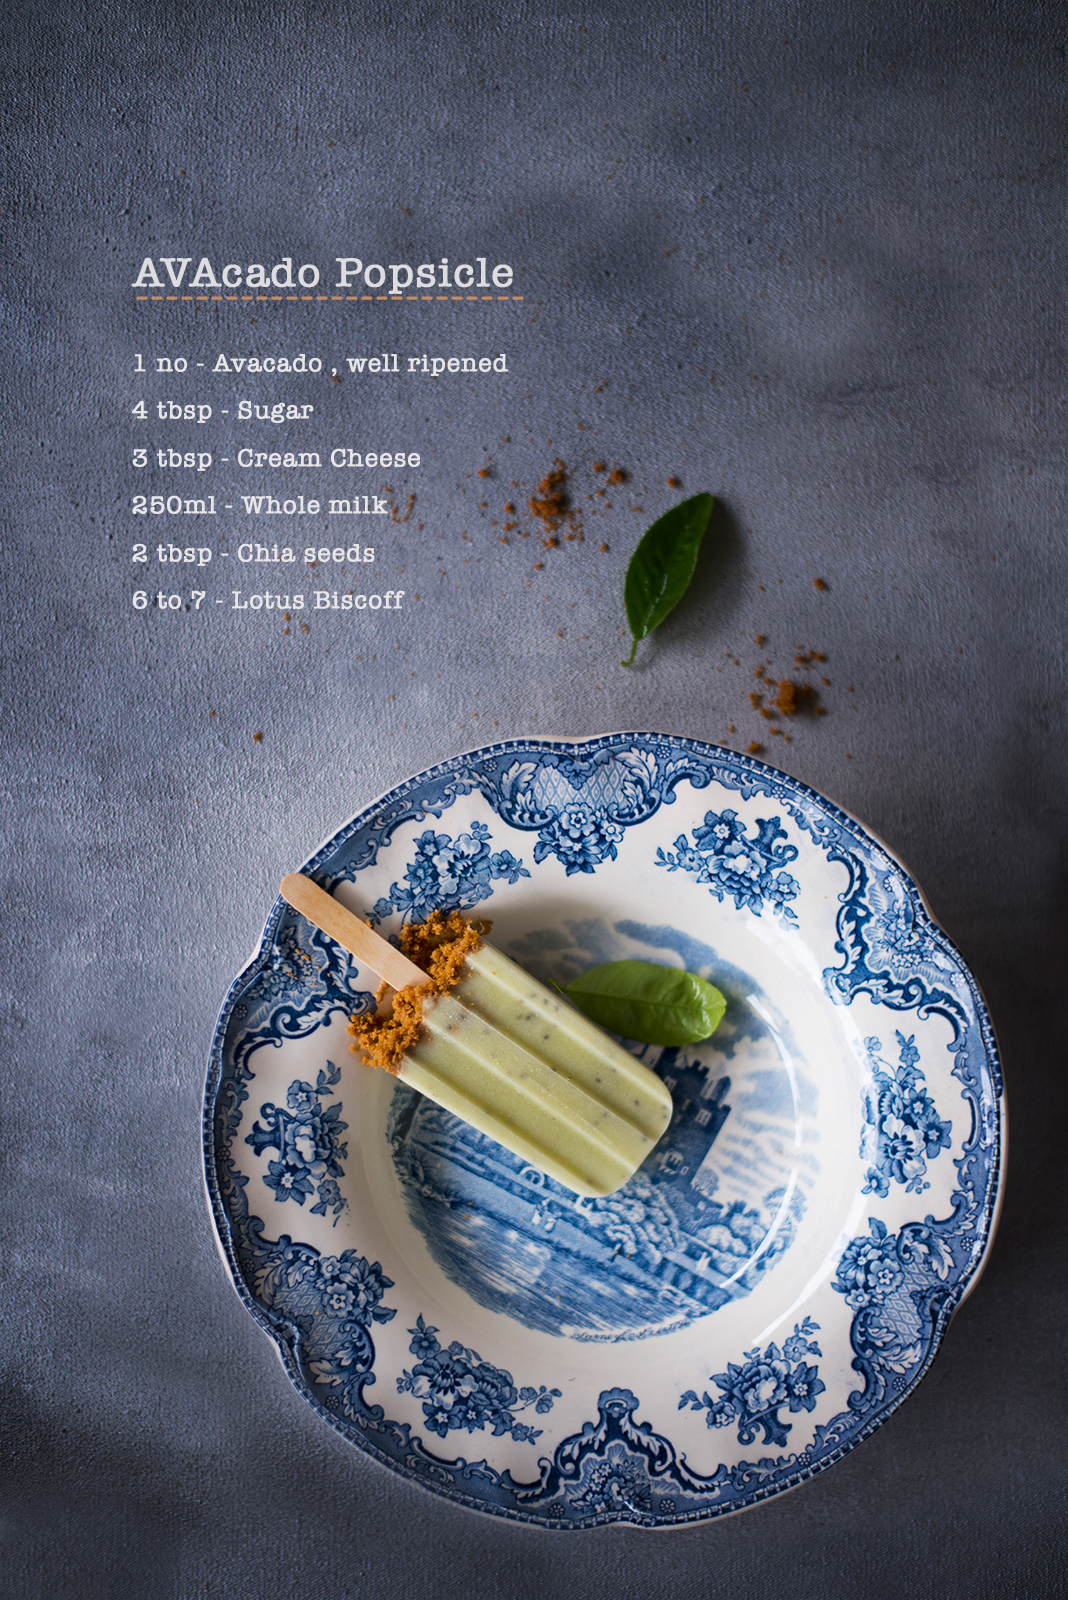 Avocado Chia Seed Popsicle is one of the most easiest and fun popsicle you can make. Avocado being creamy in nature makes this popsicle so much more creamier and rich.